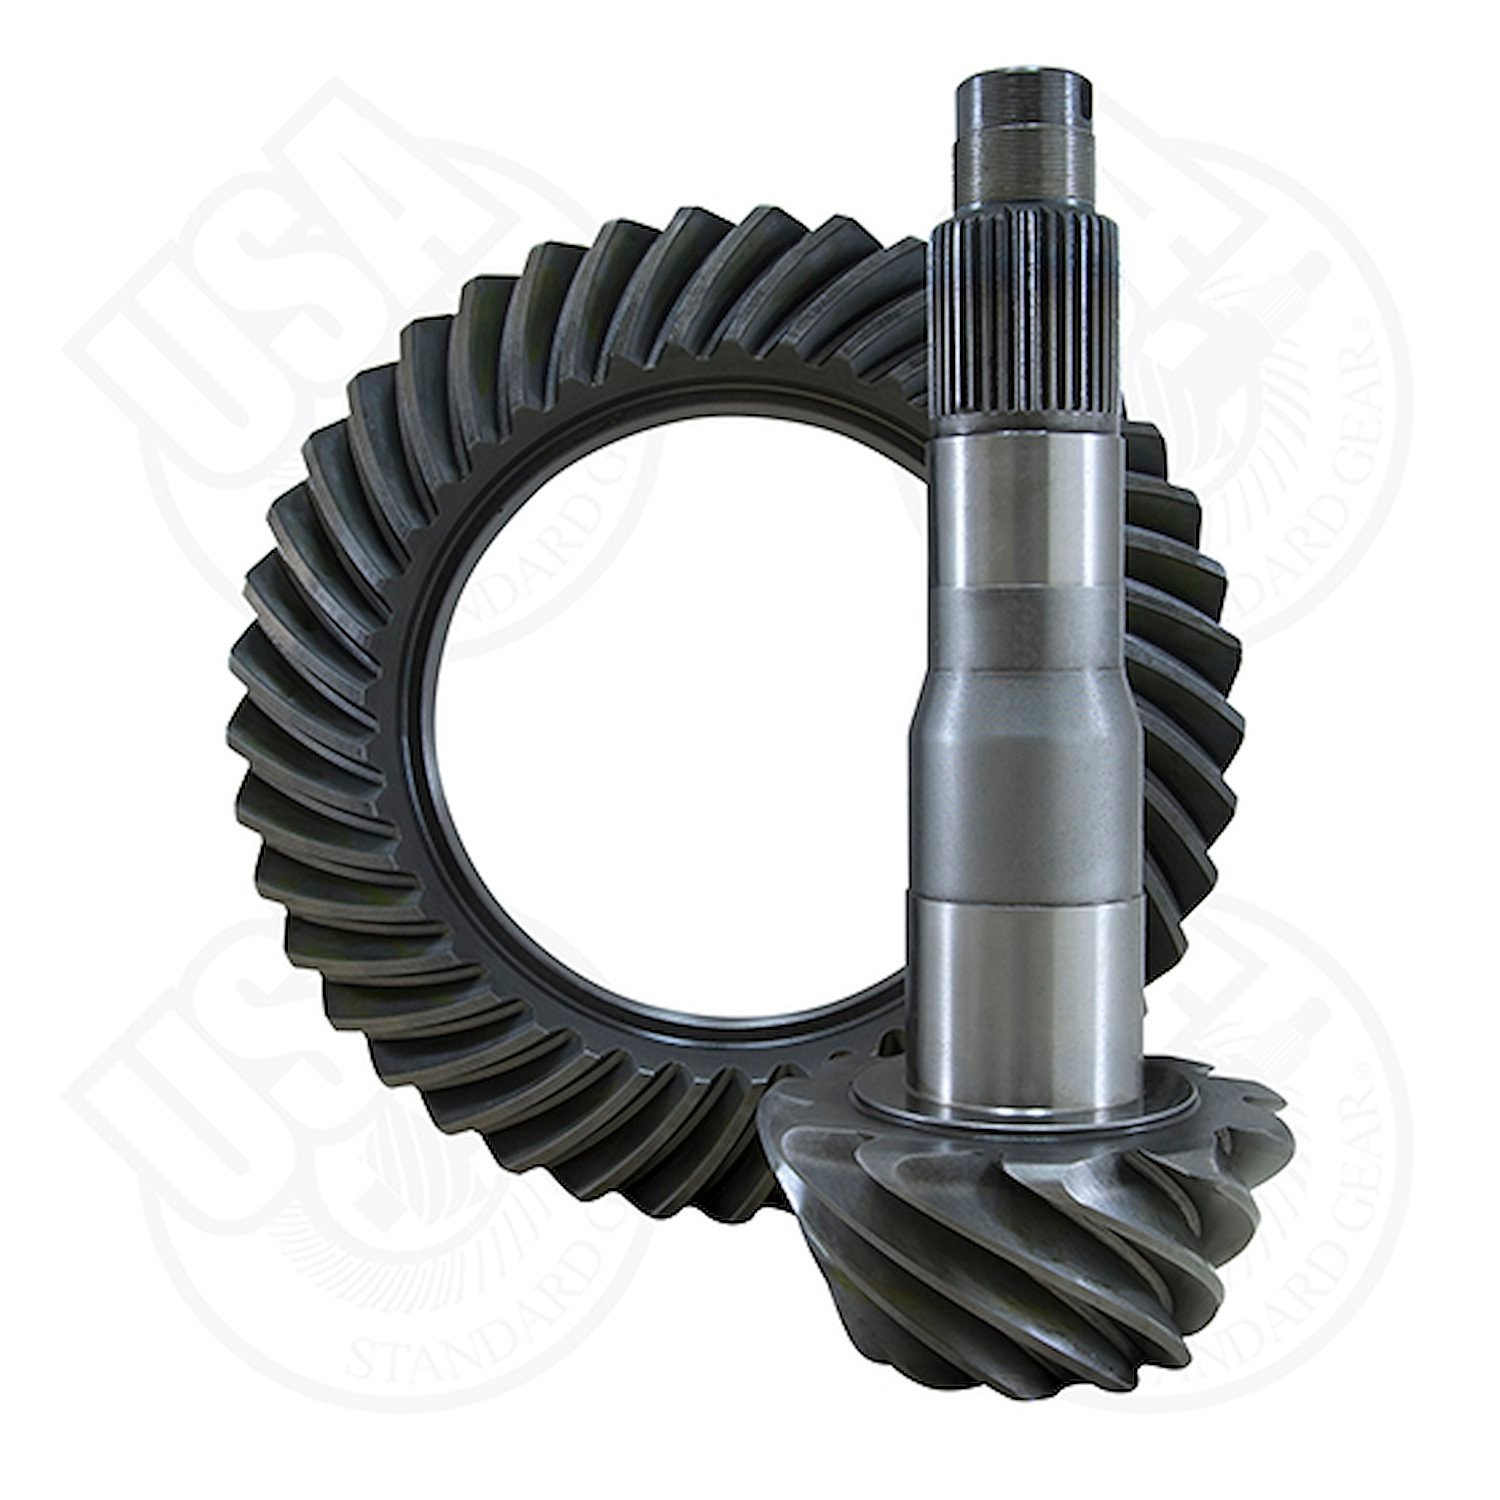 USA standard ring / pinion 11 / up Ford 10.5 3.73 ratio.